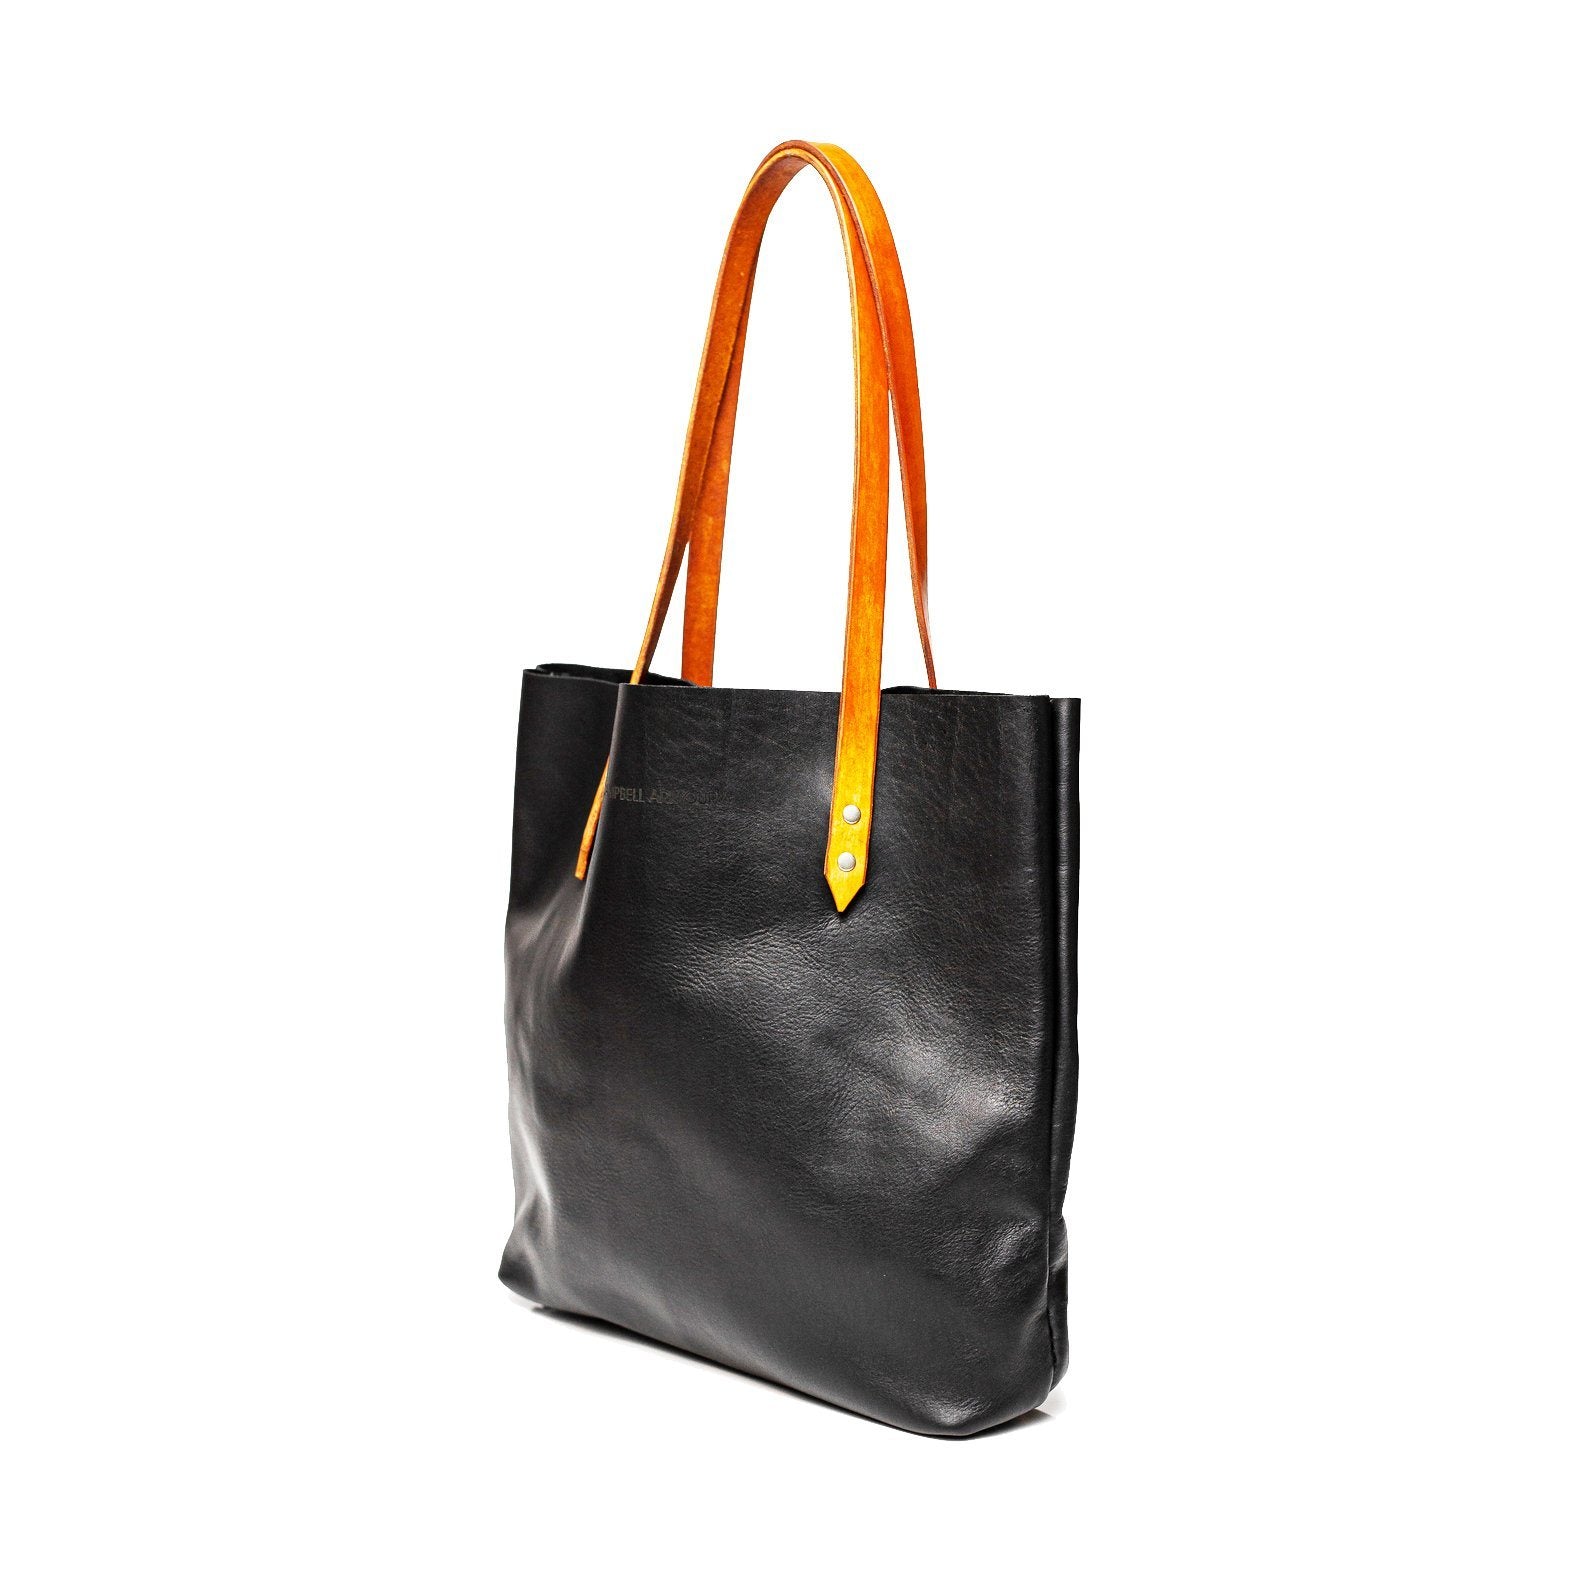 Campbell Armoury Leather Soft Tote Bag clothing & accessories Campbell Armoury black-tan